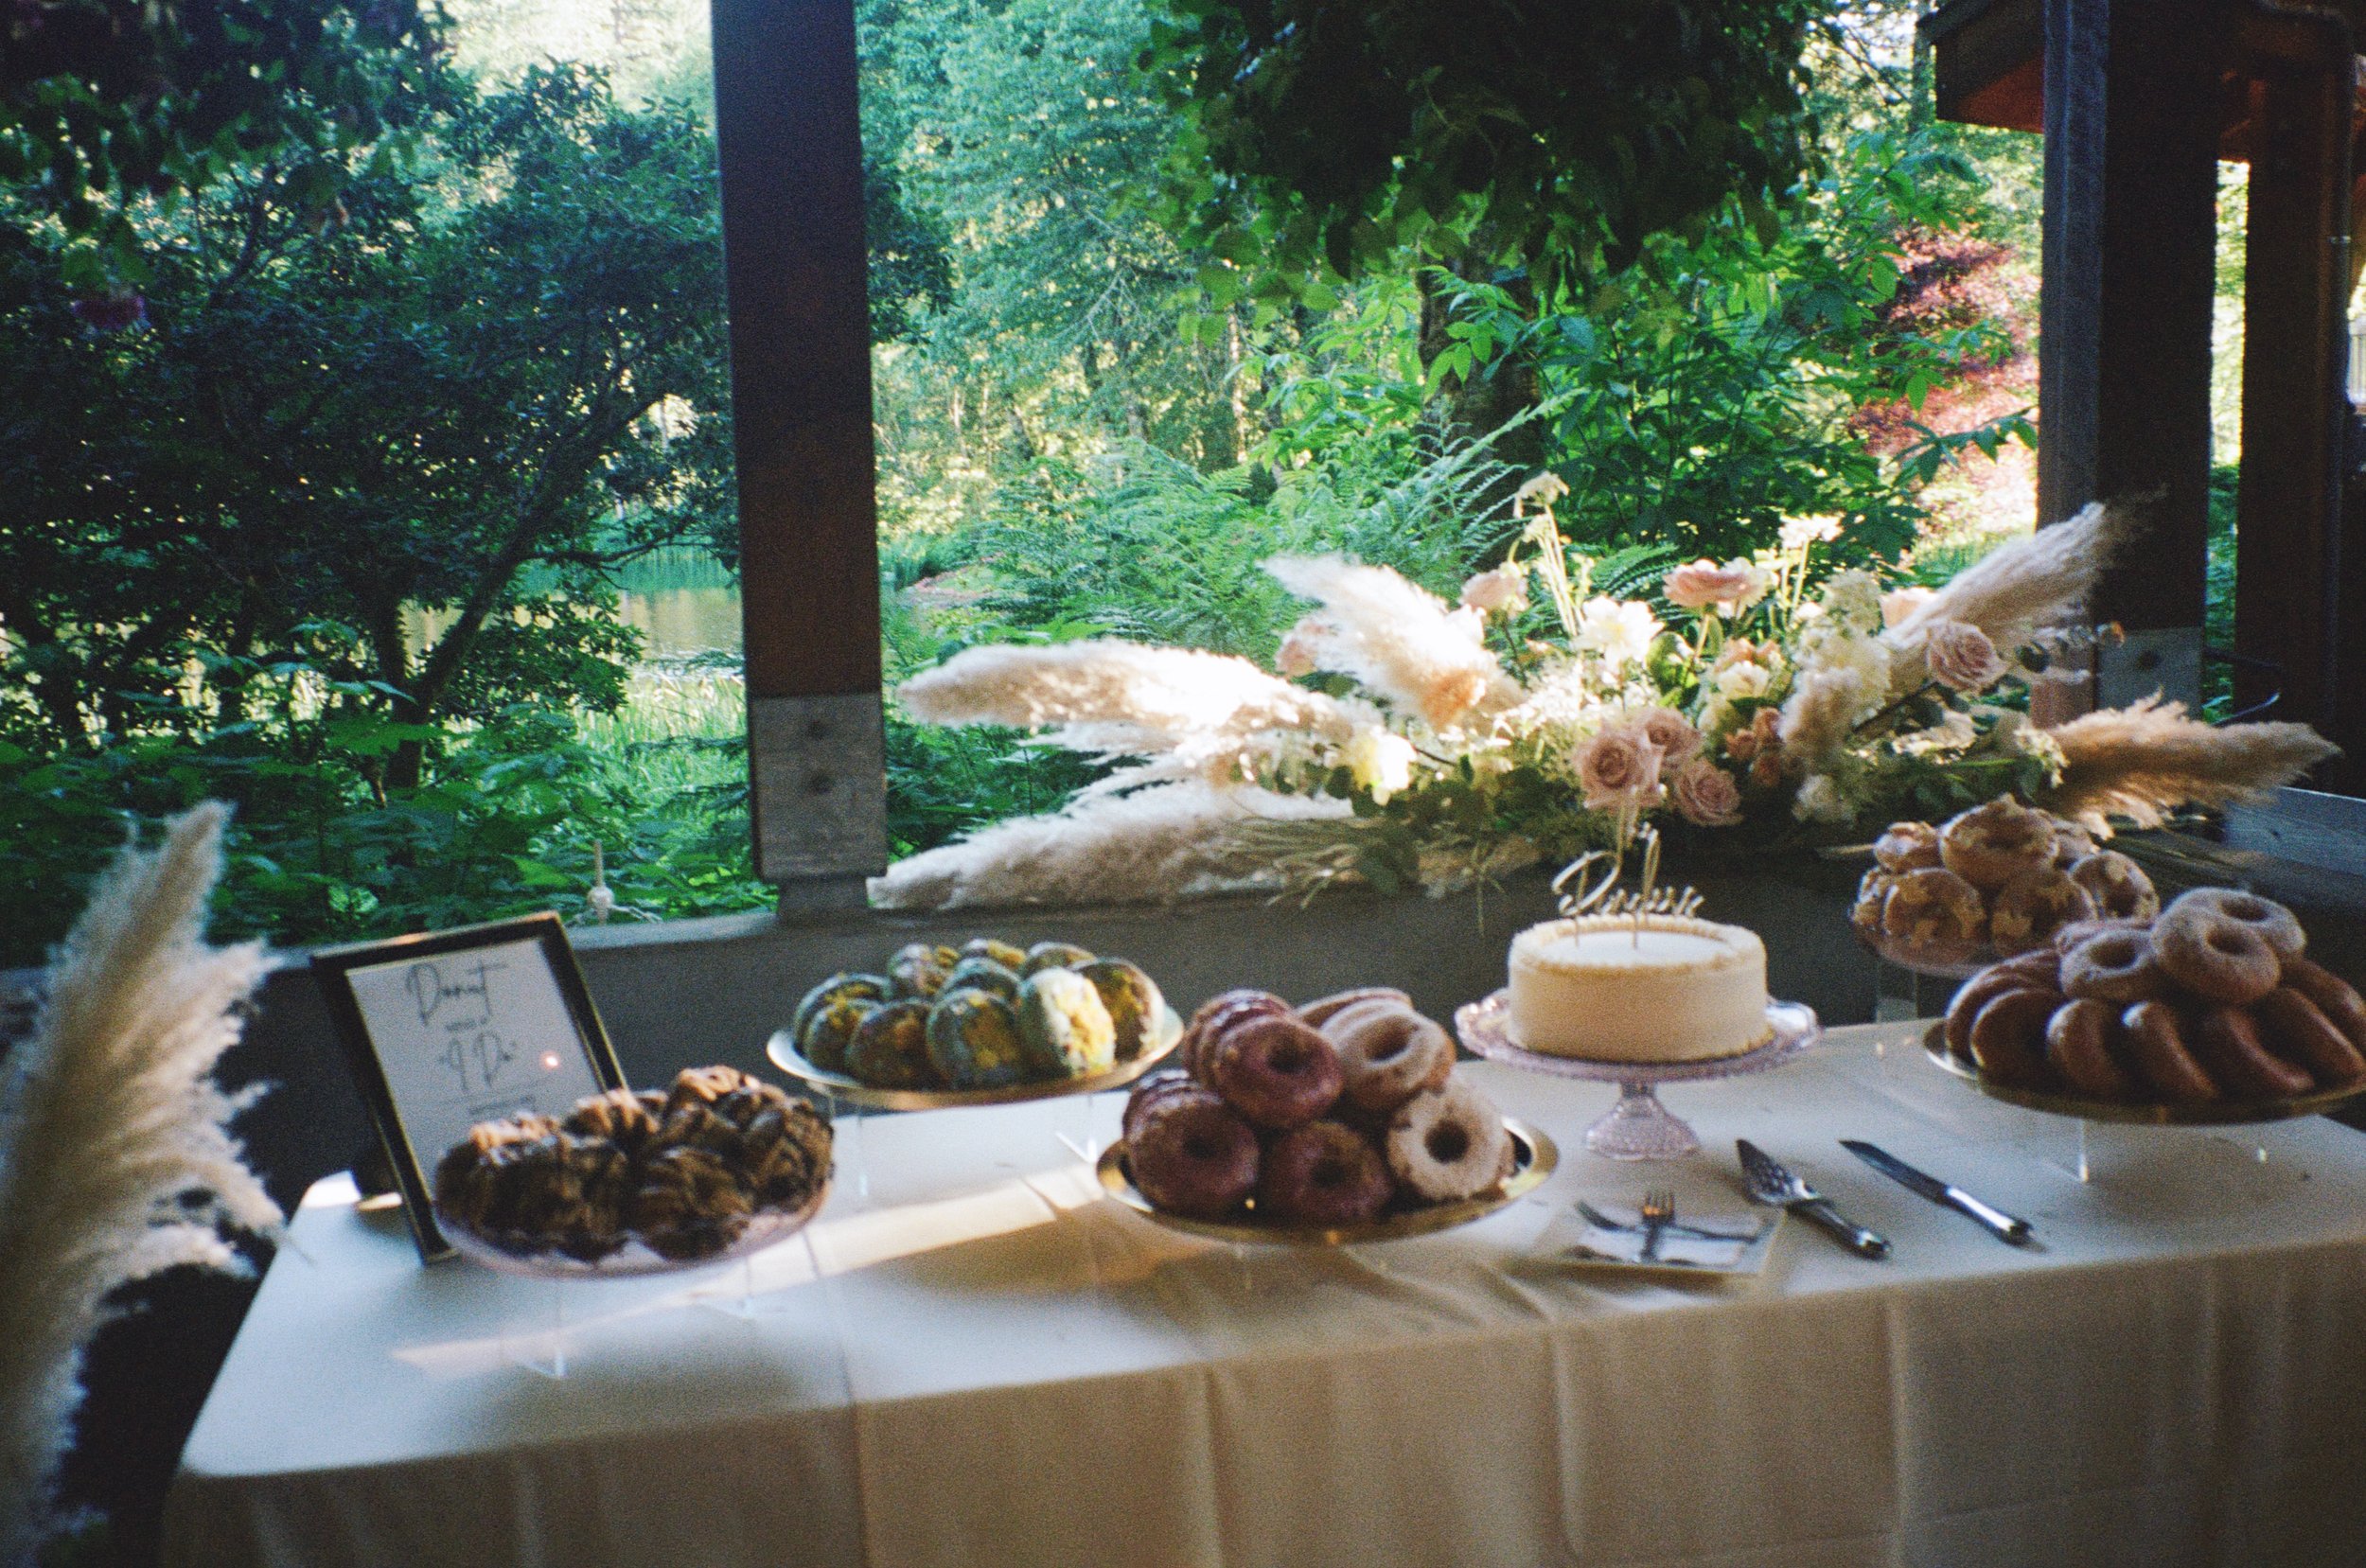 dessert table for wedding from wedding photographer. Film wedding photography in Oregon